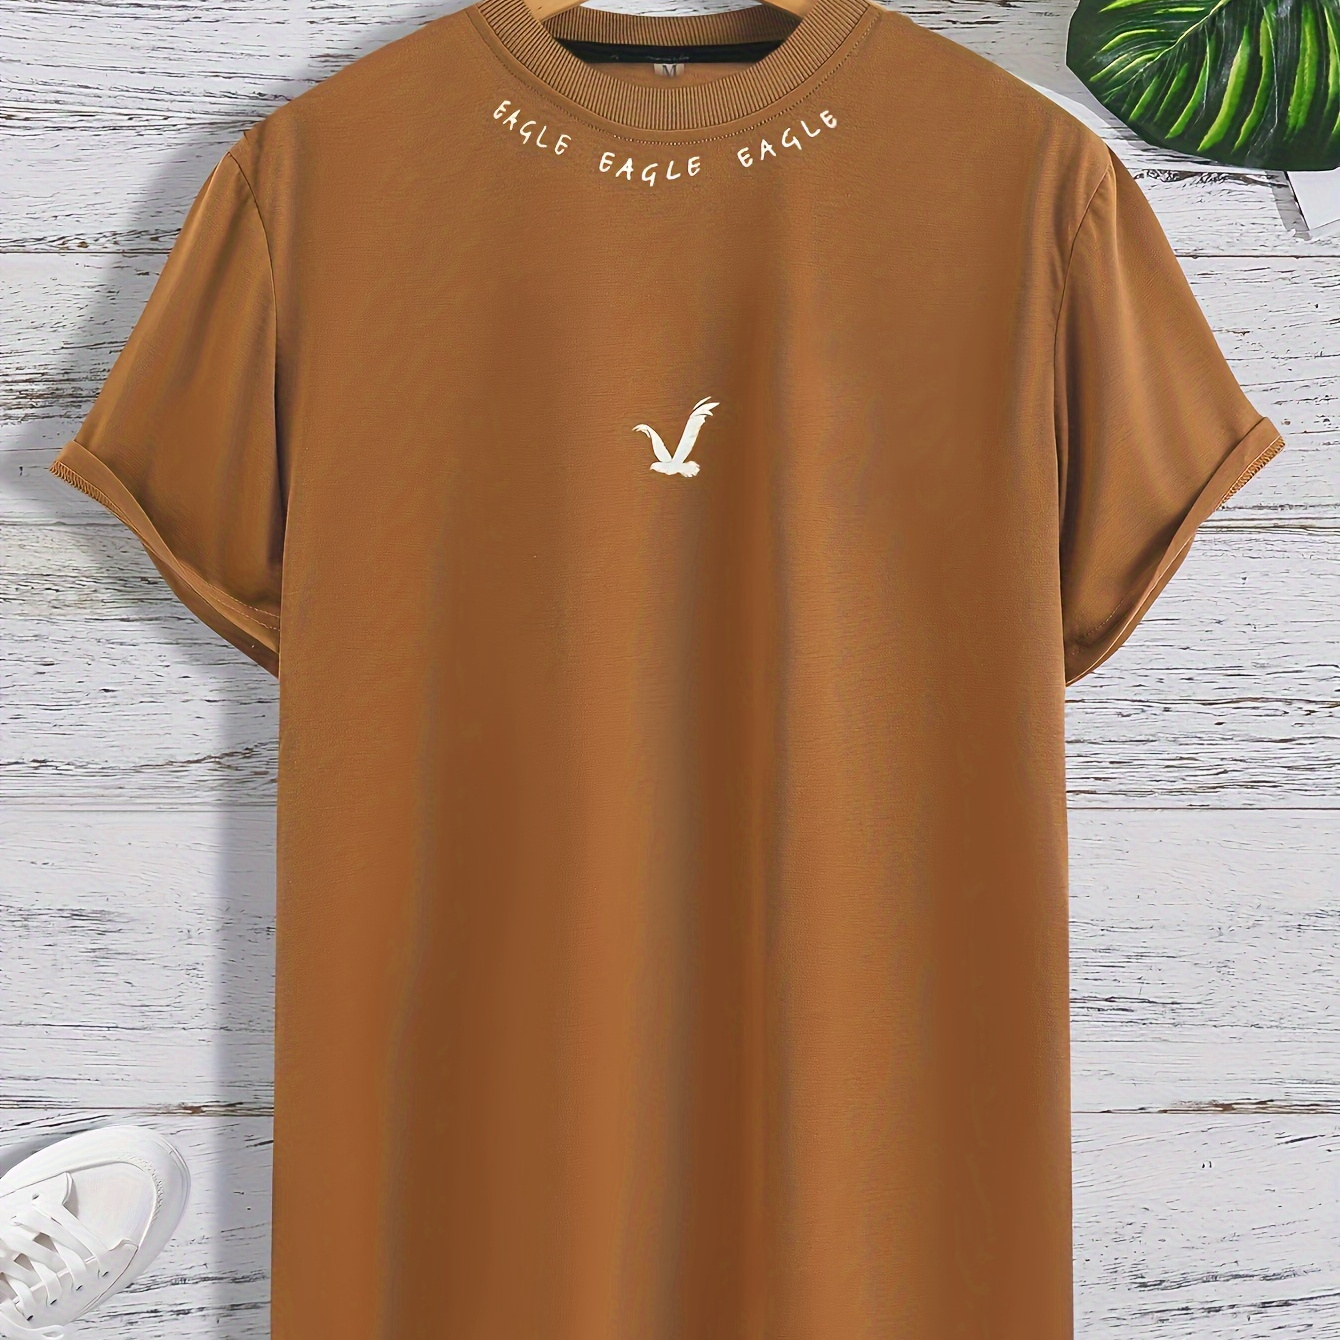 Men's Eagle Graphic Pattern And Letter Print Crew Neck And Short Sleeve T-shirt, Casual And Comfy Tops For Summer Daily Wear